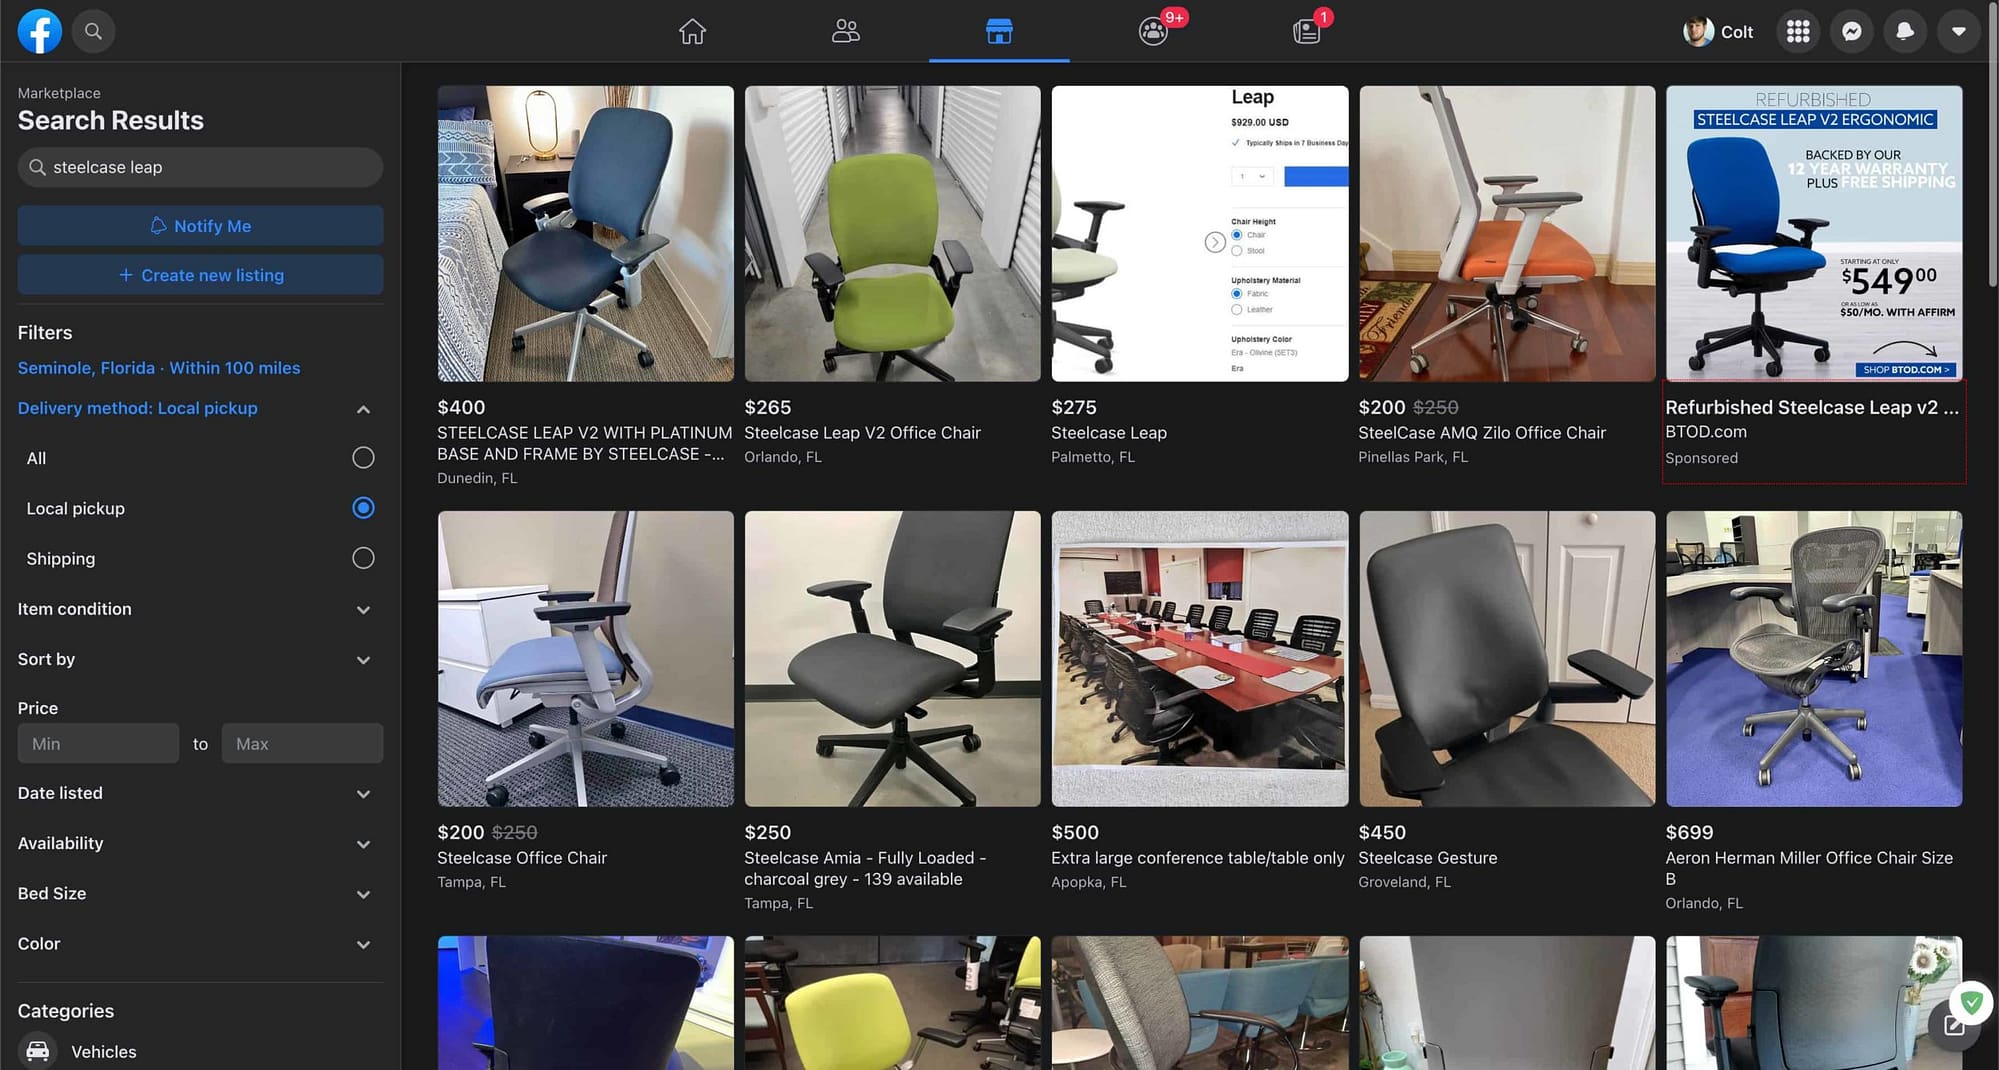 Steelcase Leap preowned facebook marketplace